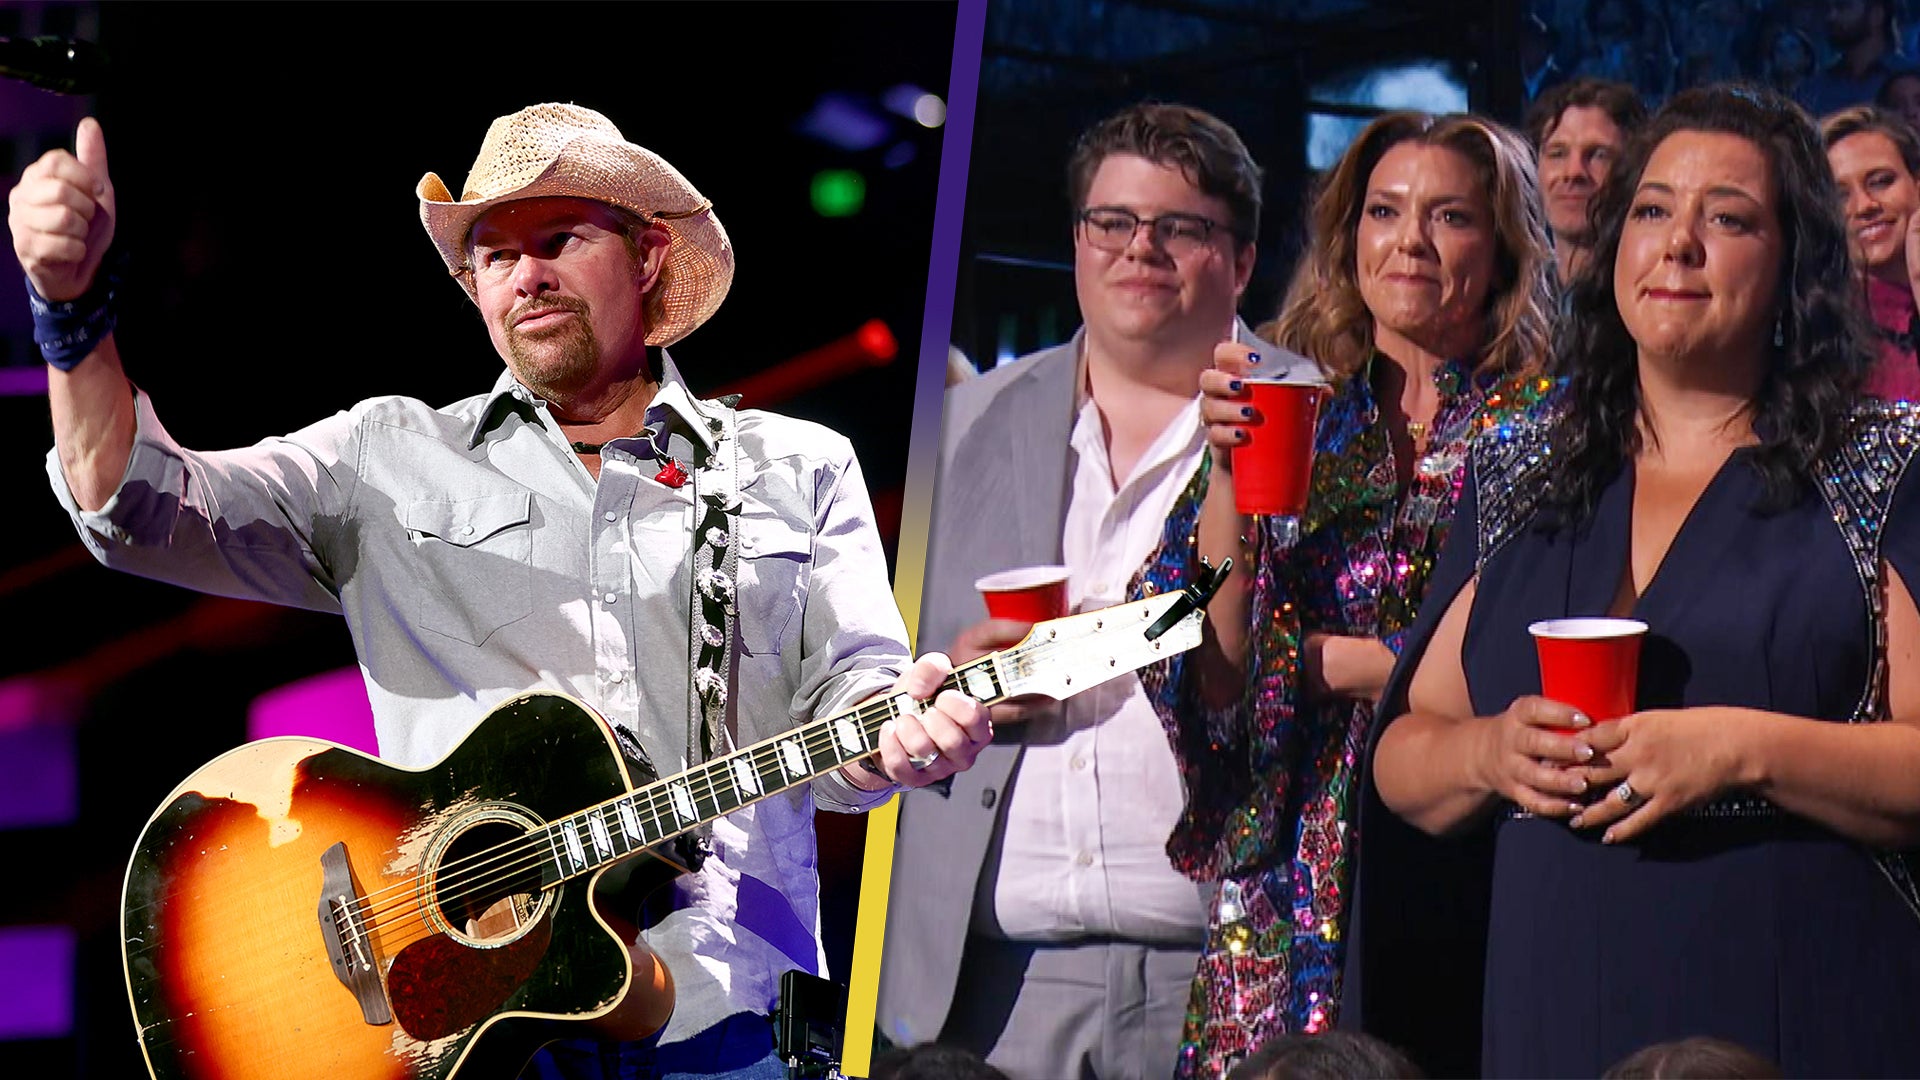 Toby Keith's Family In Tears as CMT Music Awards Honors Late Singer With Tribute Performance